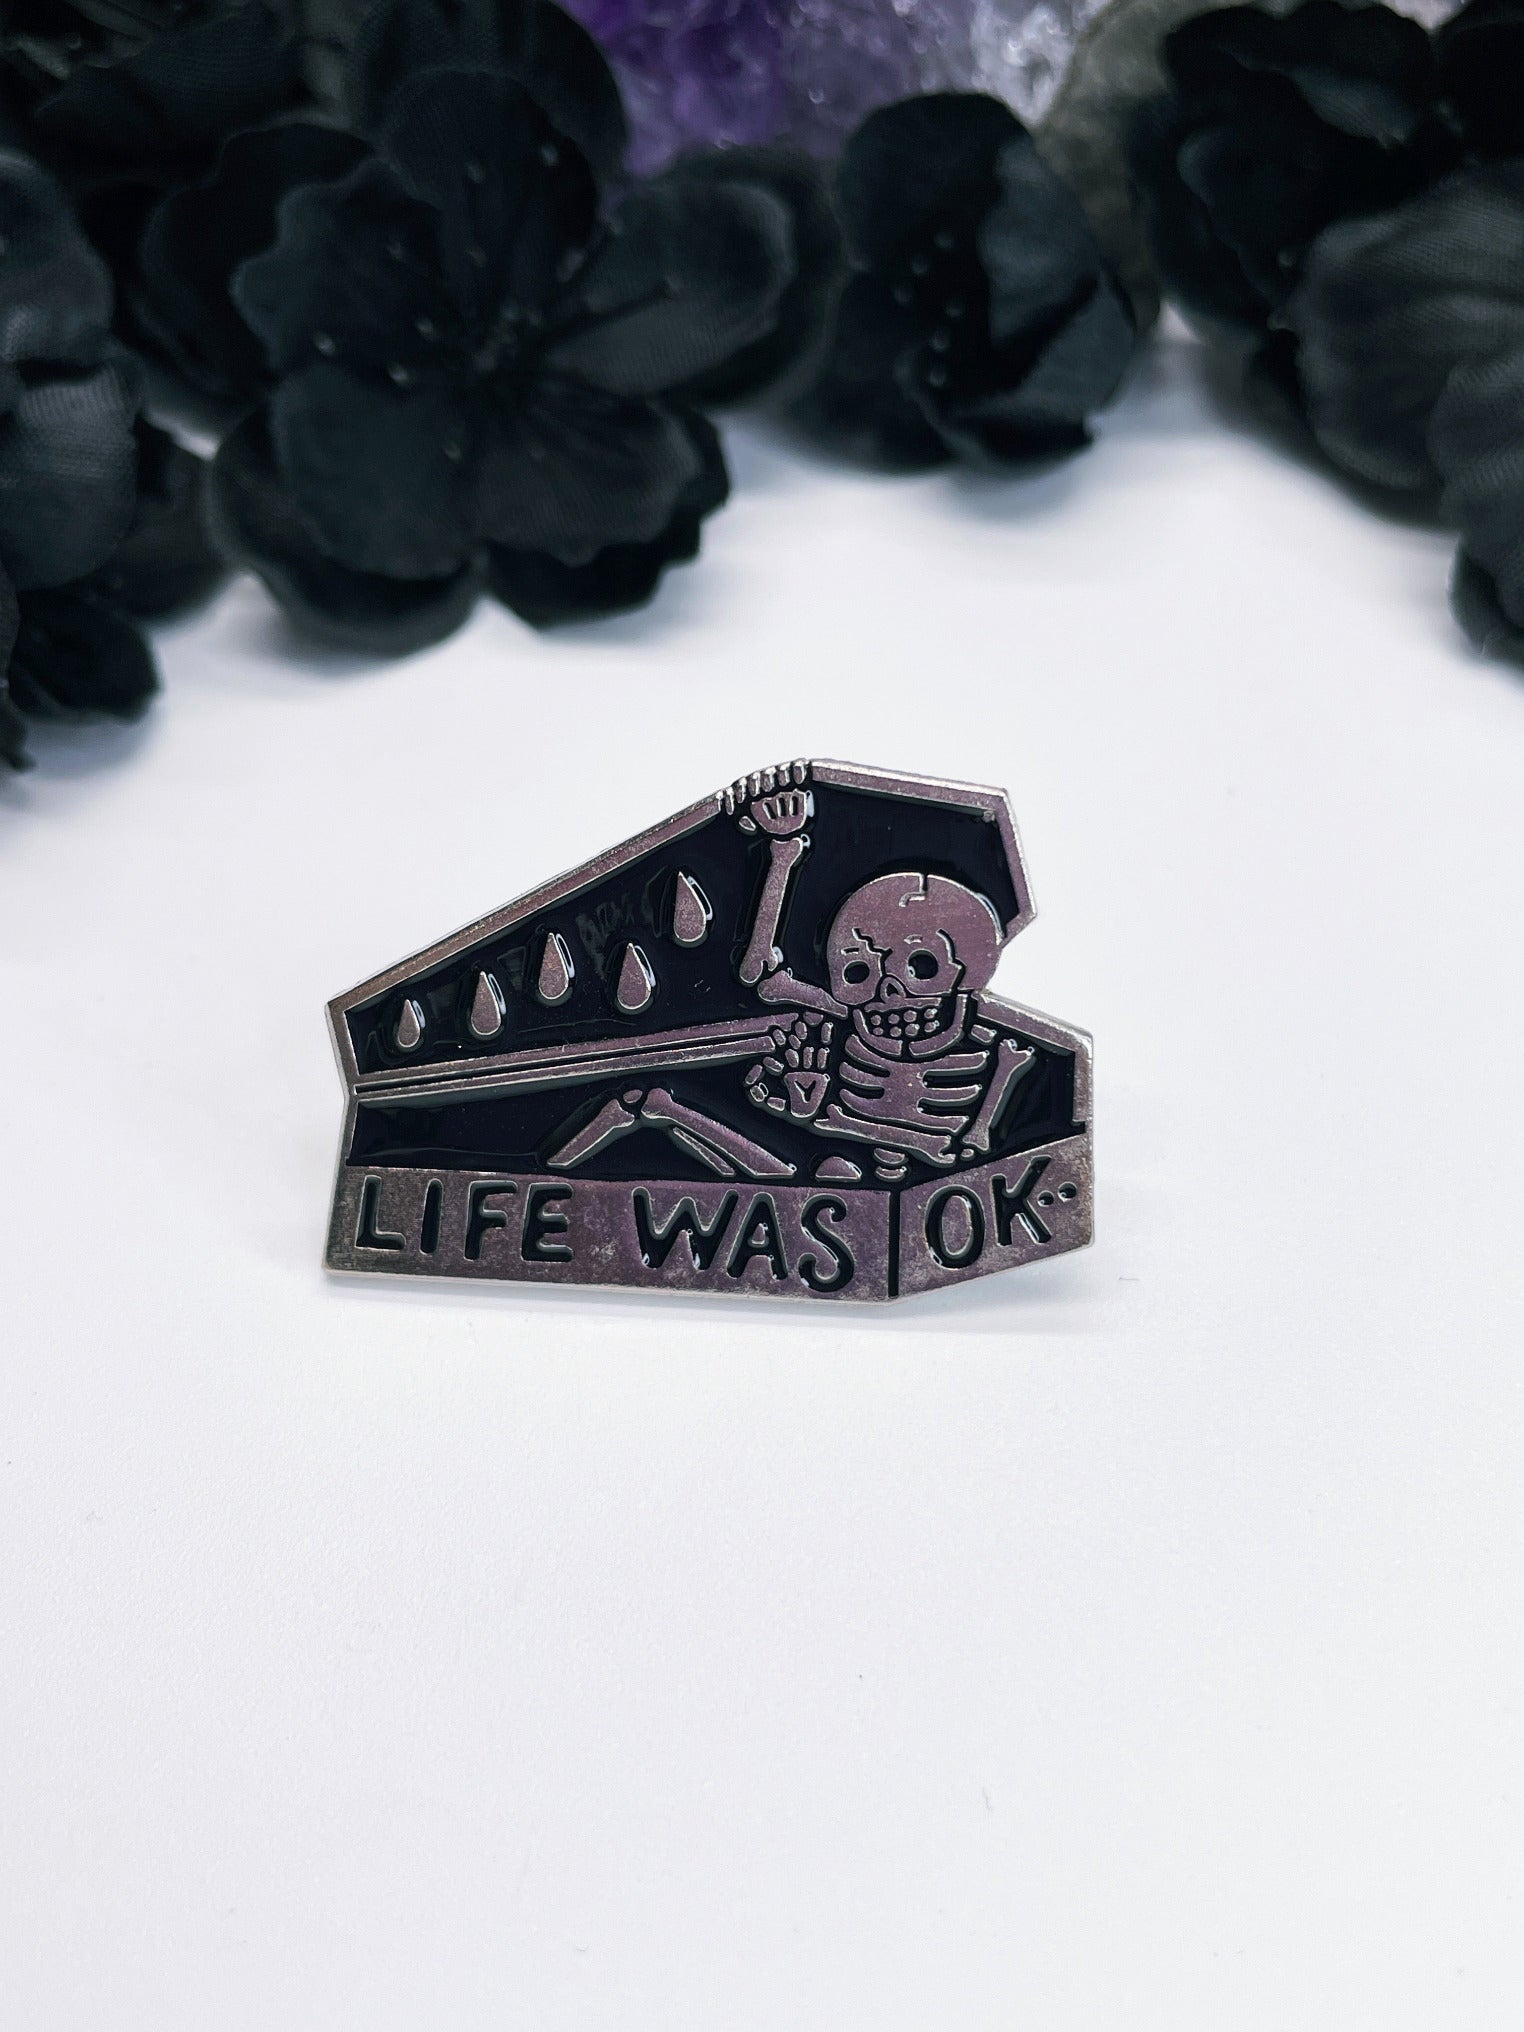 An image of an enamel pin featuring a skeleton emerging from a coffin with the words "Life was okay" written in black letters below it. The pin is coffin-shaped with a silver border and has a metal fastener on the back. The pin is a humorous and ironic take on life and death, and is perfect for anyone who enjoys dark humor or has a gothic and macabre style. 